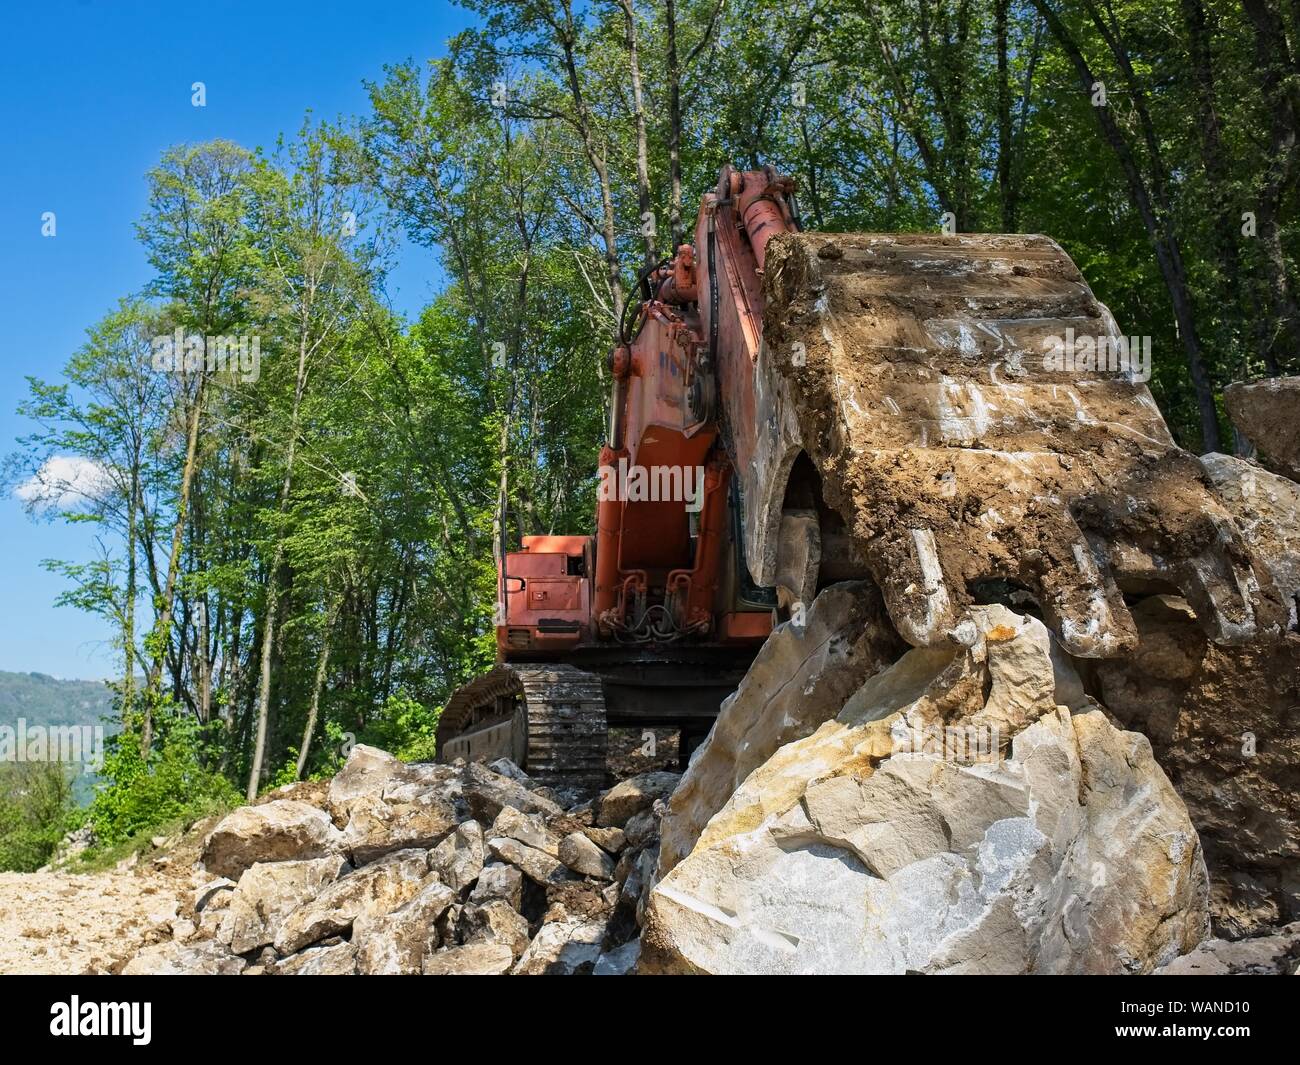 Excavator loader machine at road construction site Stock Photo